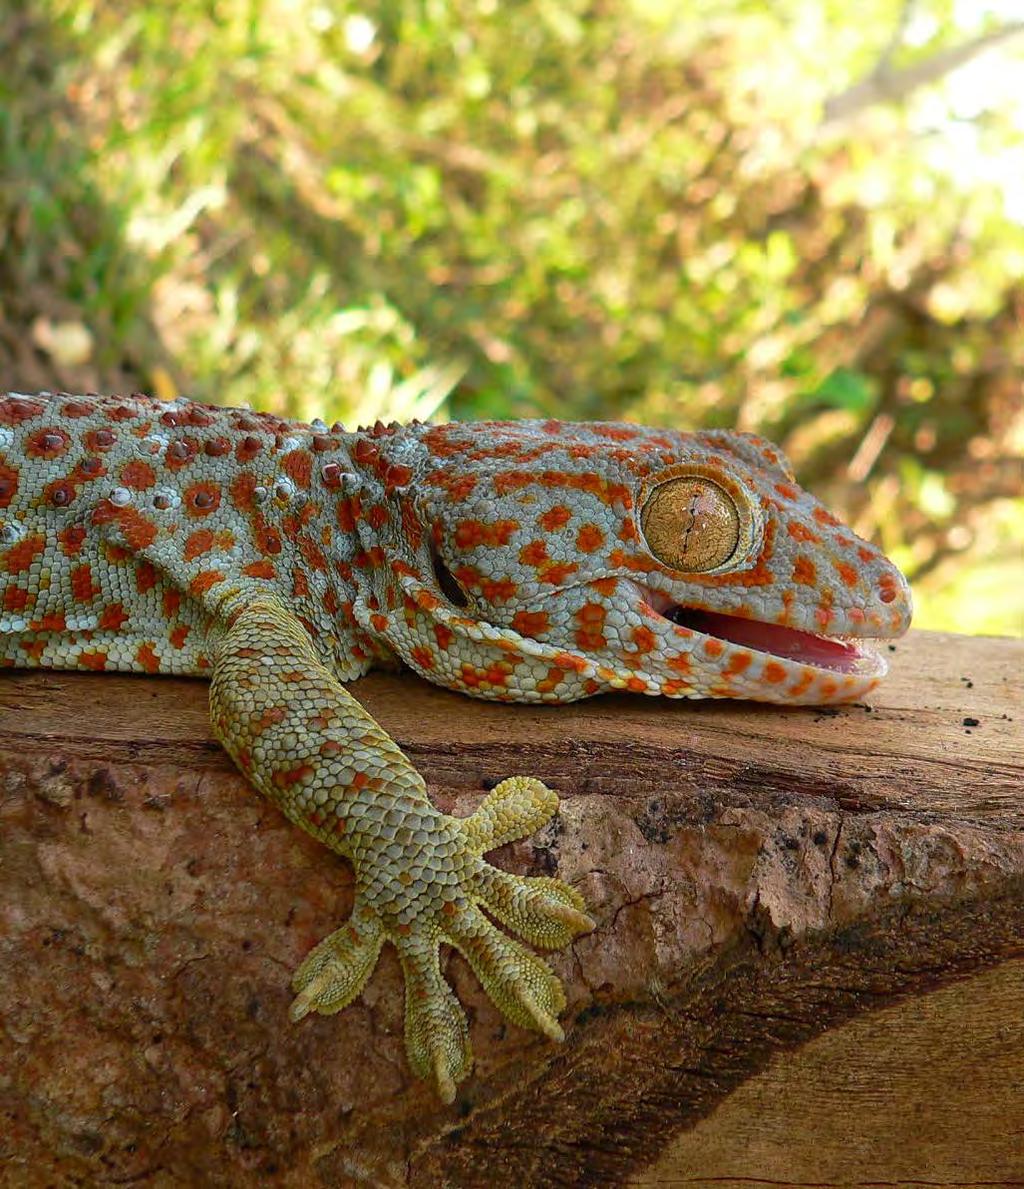 TRAFFIC r e p o r t OCTOBER 2015 ADDING UP THE NUMBERS An investigation into commercial breeding of Tokay Geckos in Indonesia Tokay Geckos in